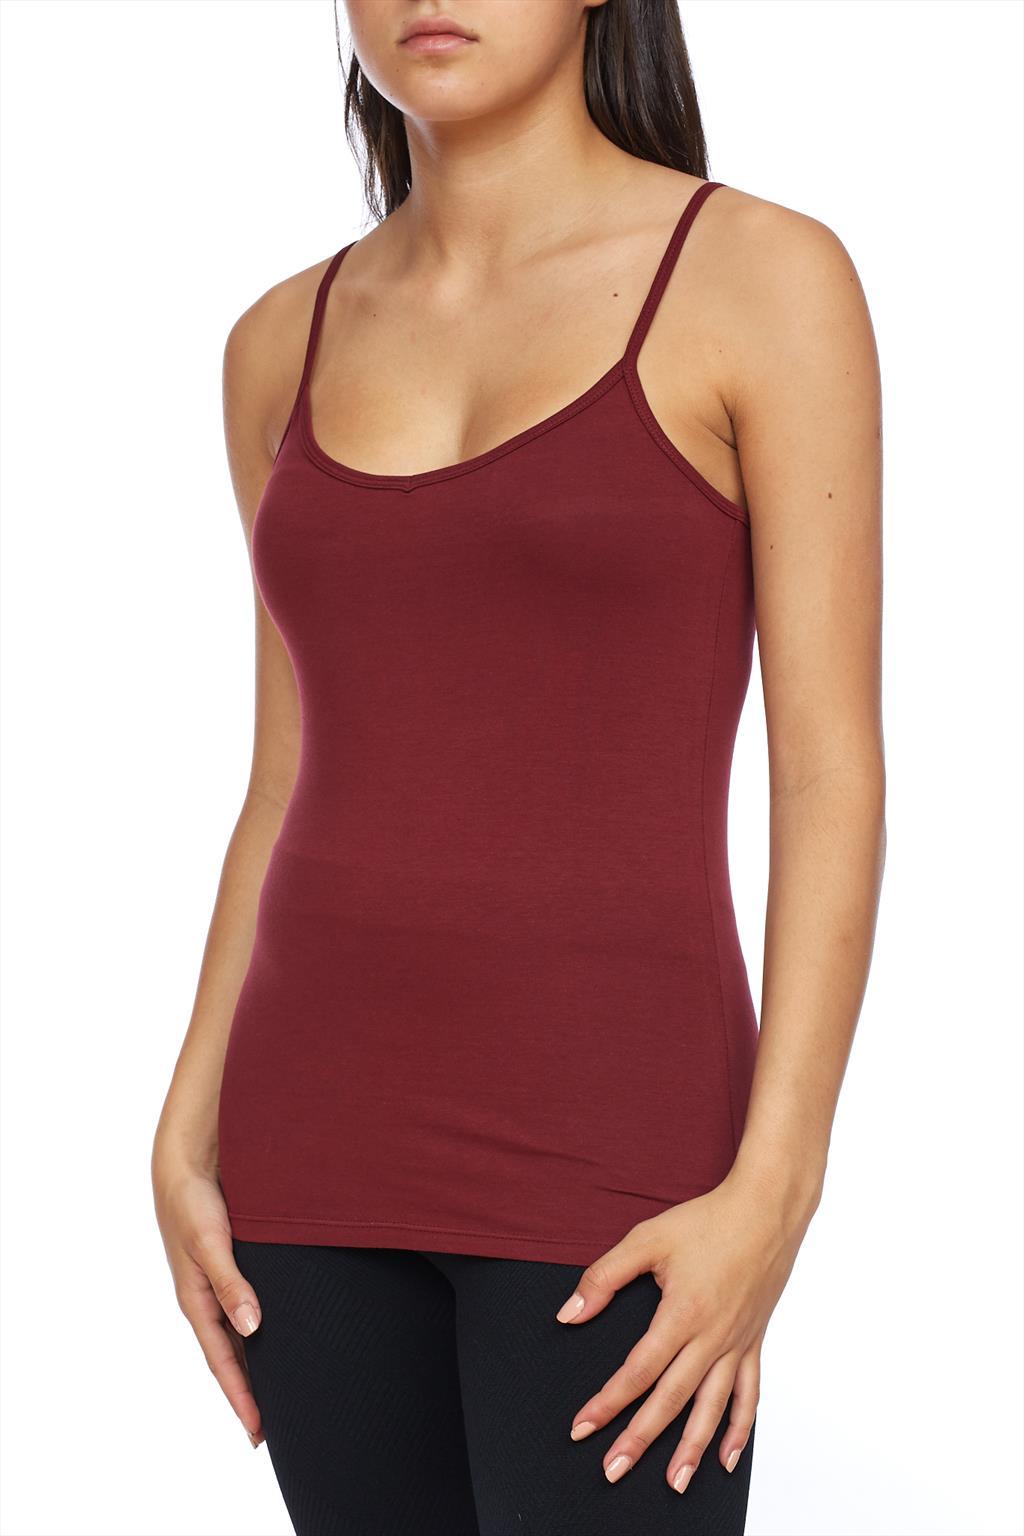 Shop Prisma's Basic Camisole in Frenchwine for Versatile Style